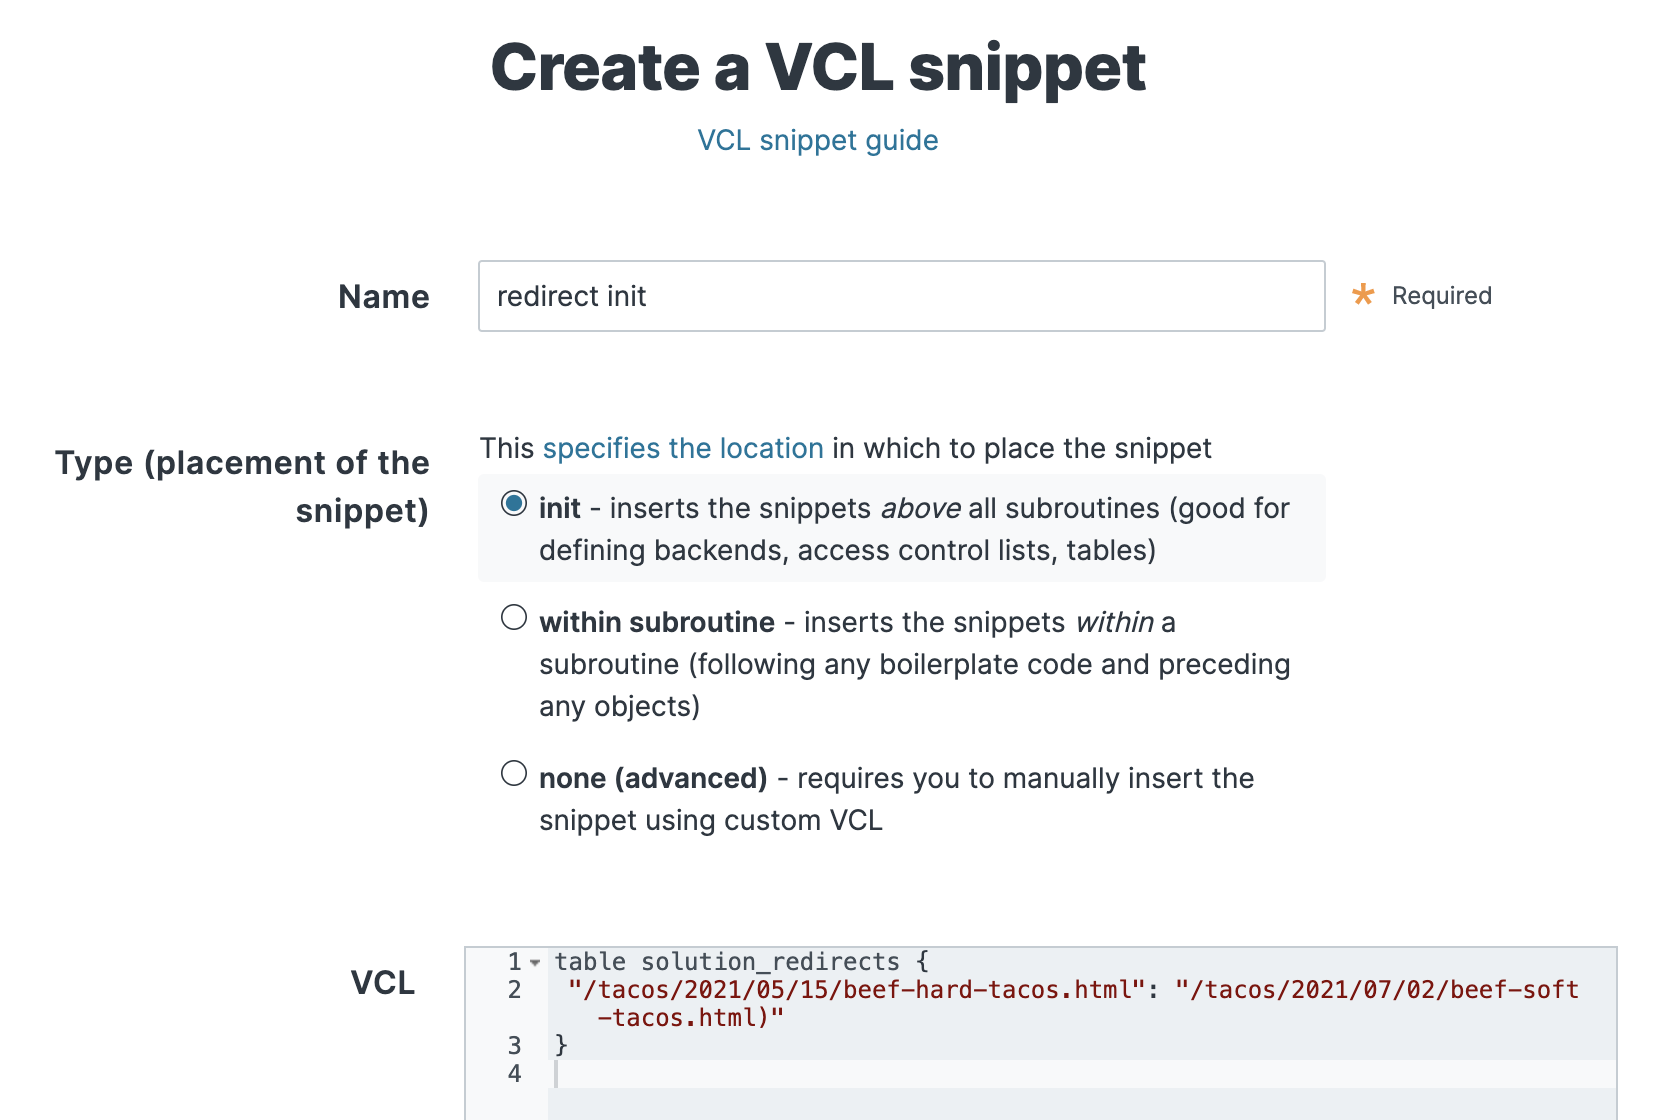 Creating a VCL snippet in the Fastly web interface